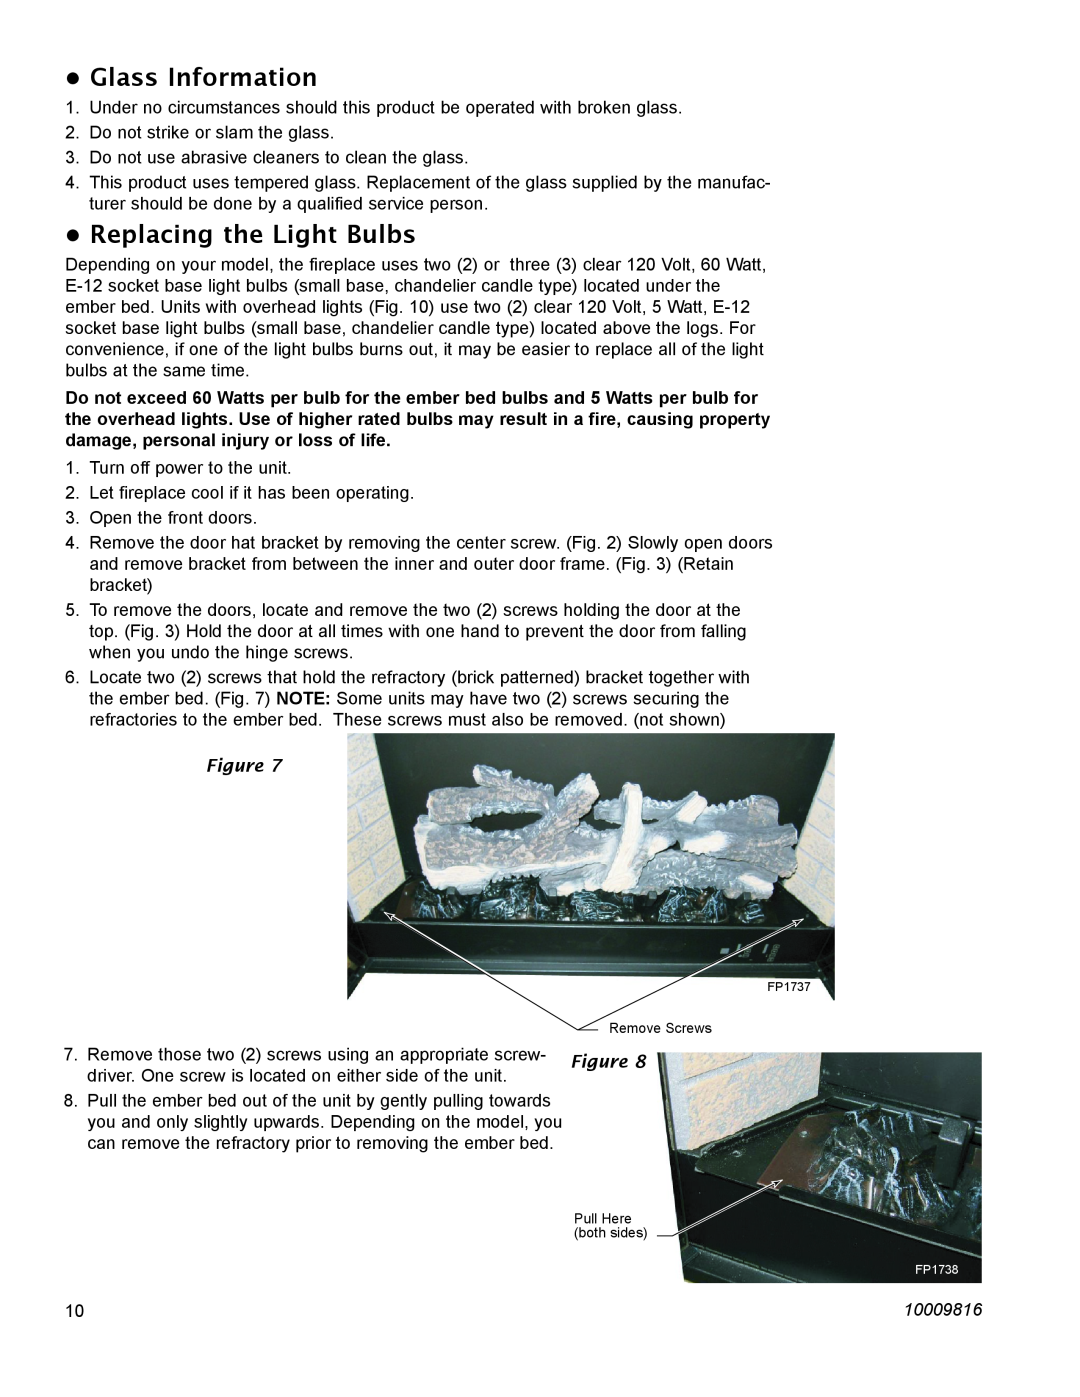 Vermont Casting EF26FG, EF22 operating instructions Glass Information, Replacing the Light Bulbs, 10009816 